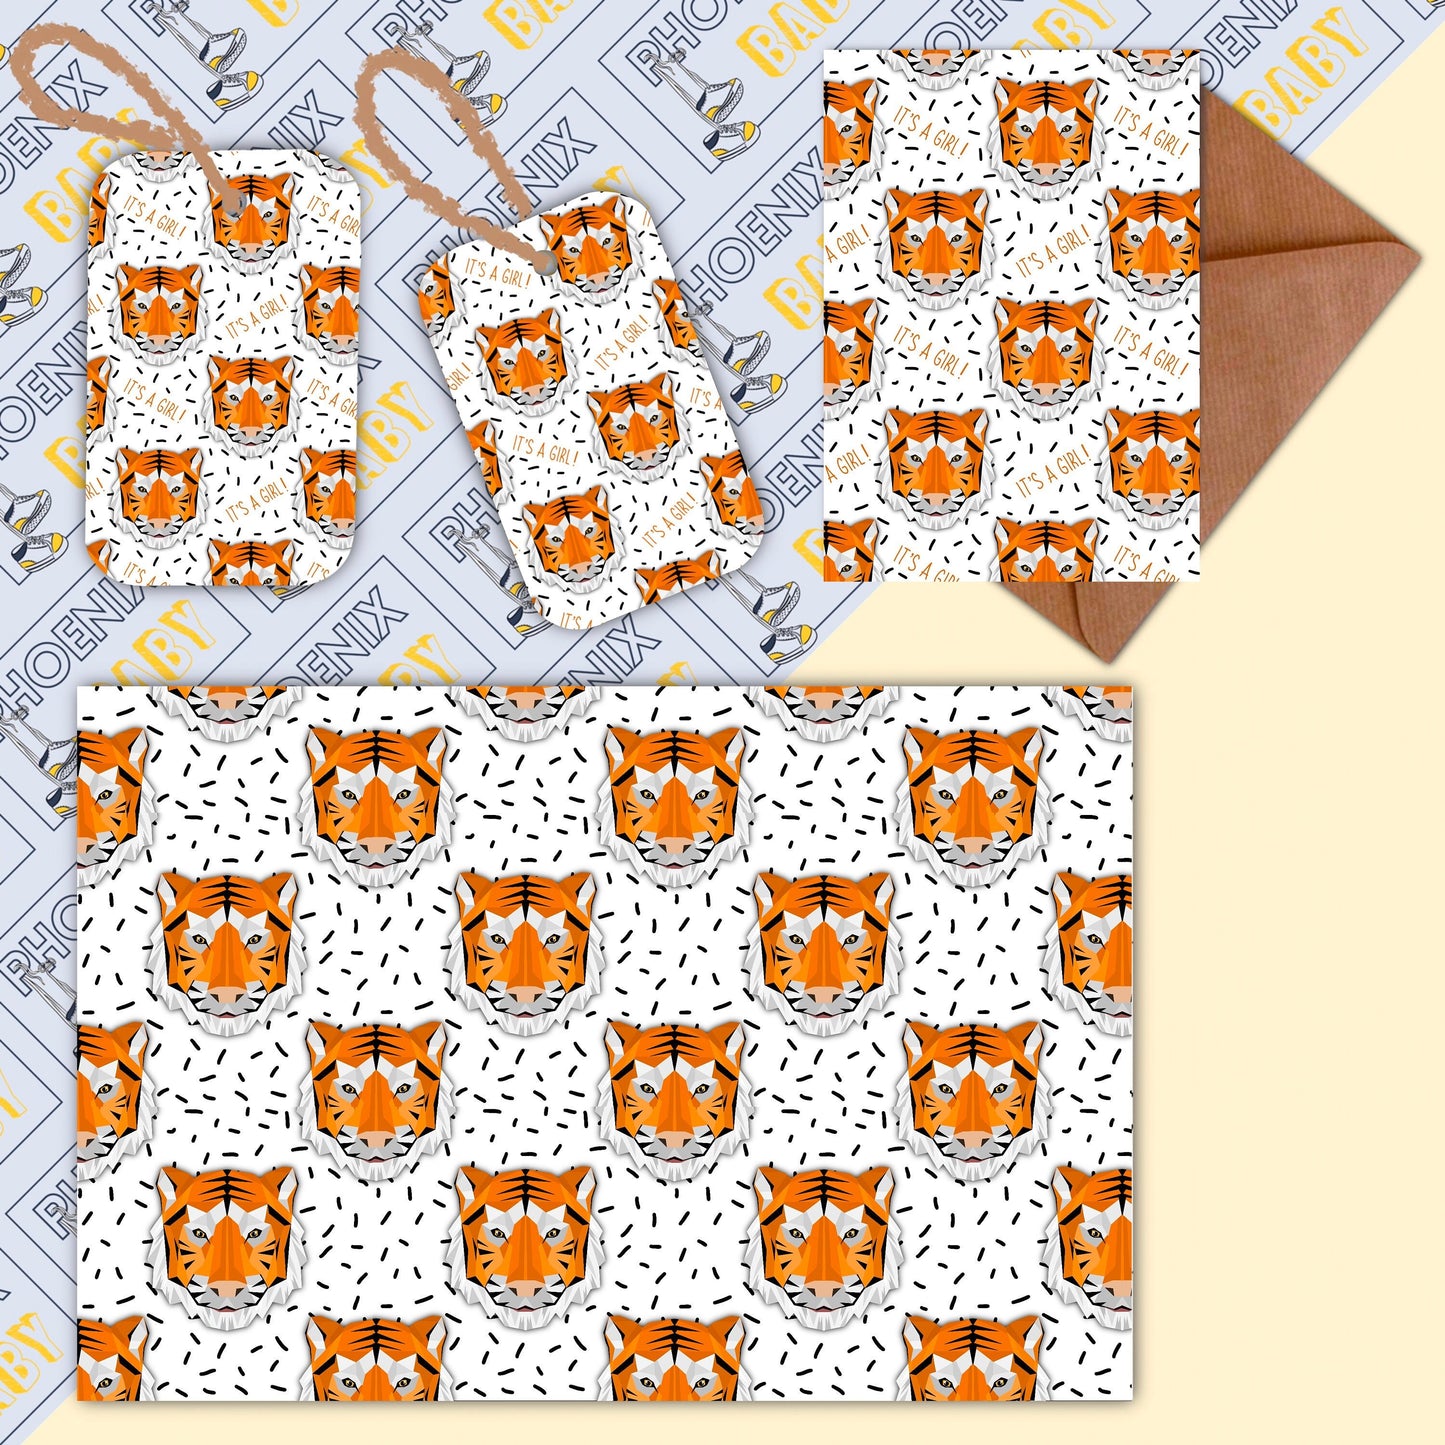 Tiger Wrapping Paper // It's a girl gift wrap, Tiger gift wrap, Tiger gift tags, Tiger card, Tiger wrapping set, Tiger baby gift ideas